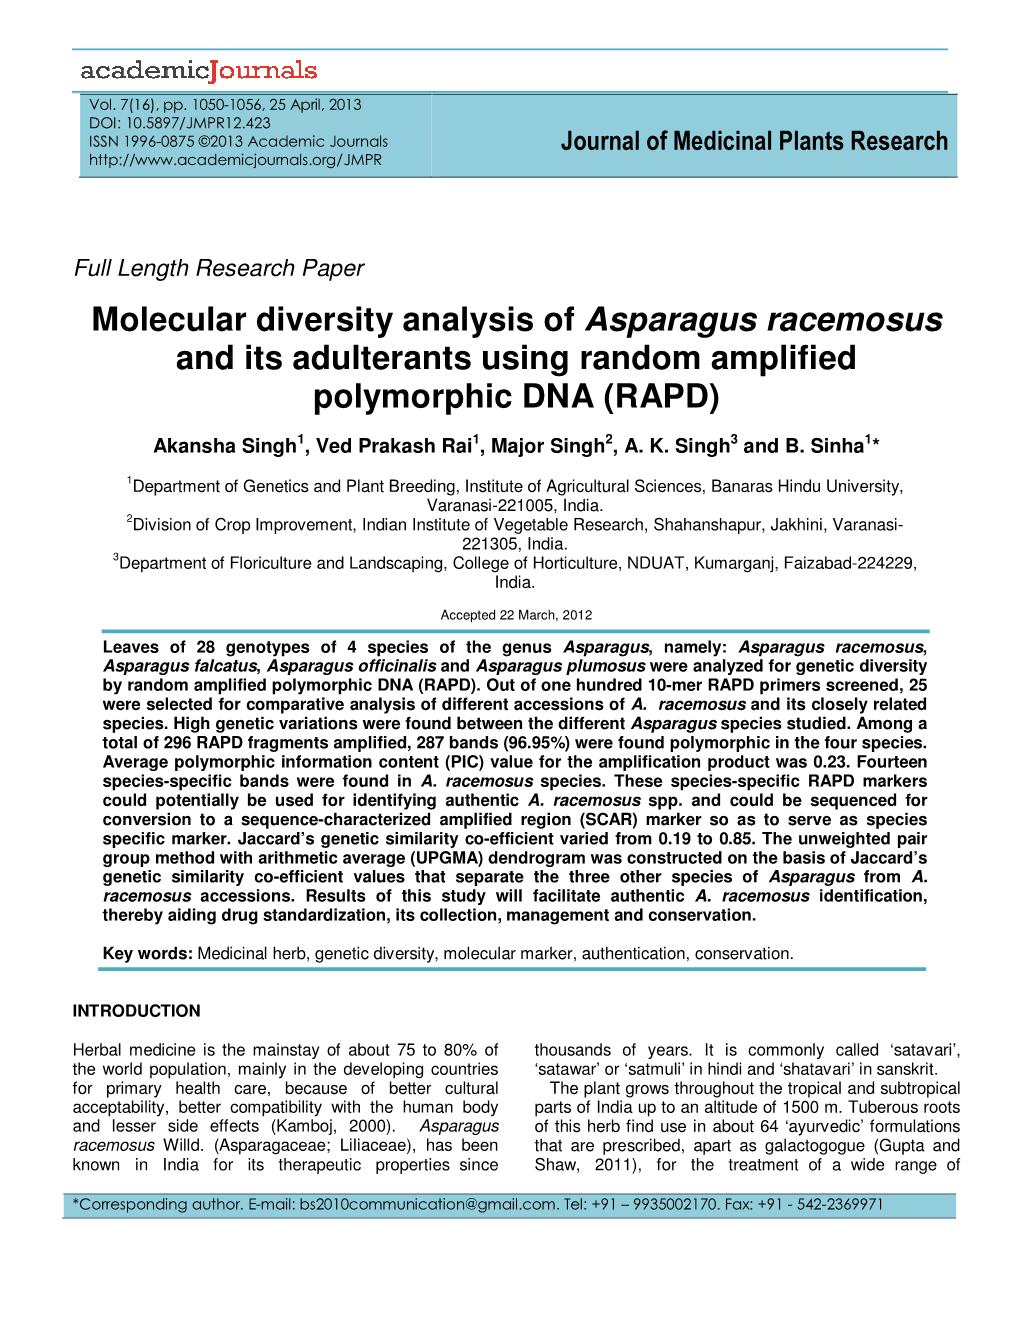 Molecular Diversity Analysis of Asparagus Racemosus and Its Adulterants Using Random Amplified Polymorphic DNA (RAPD)